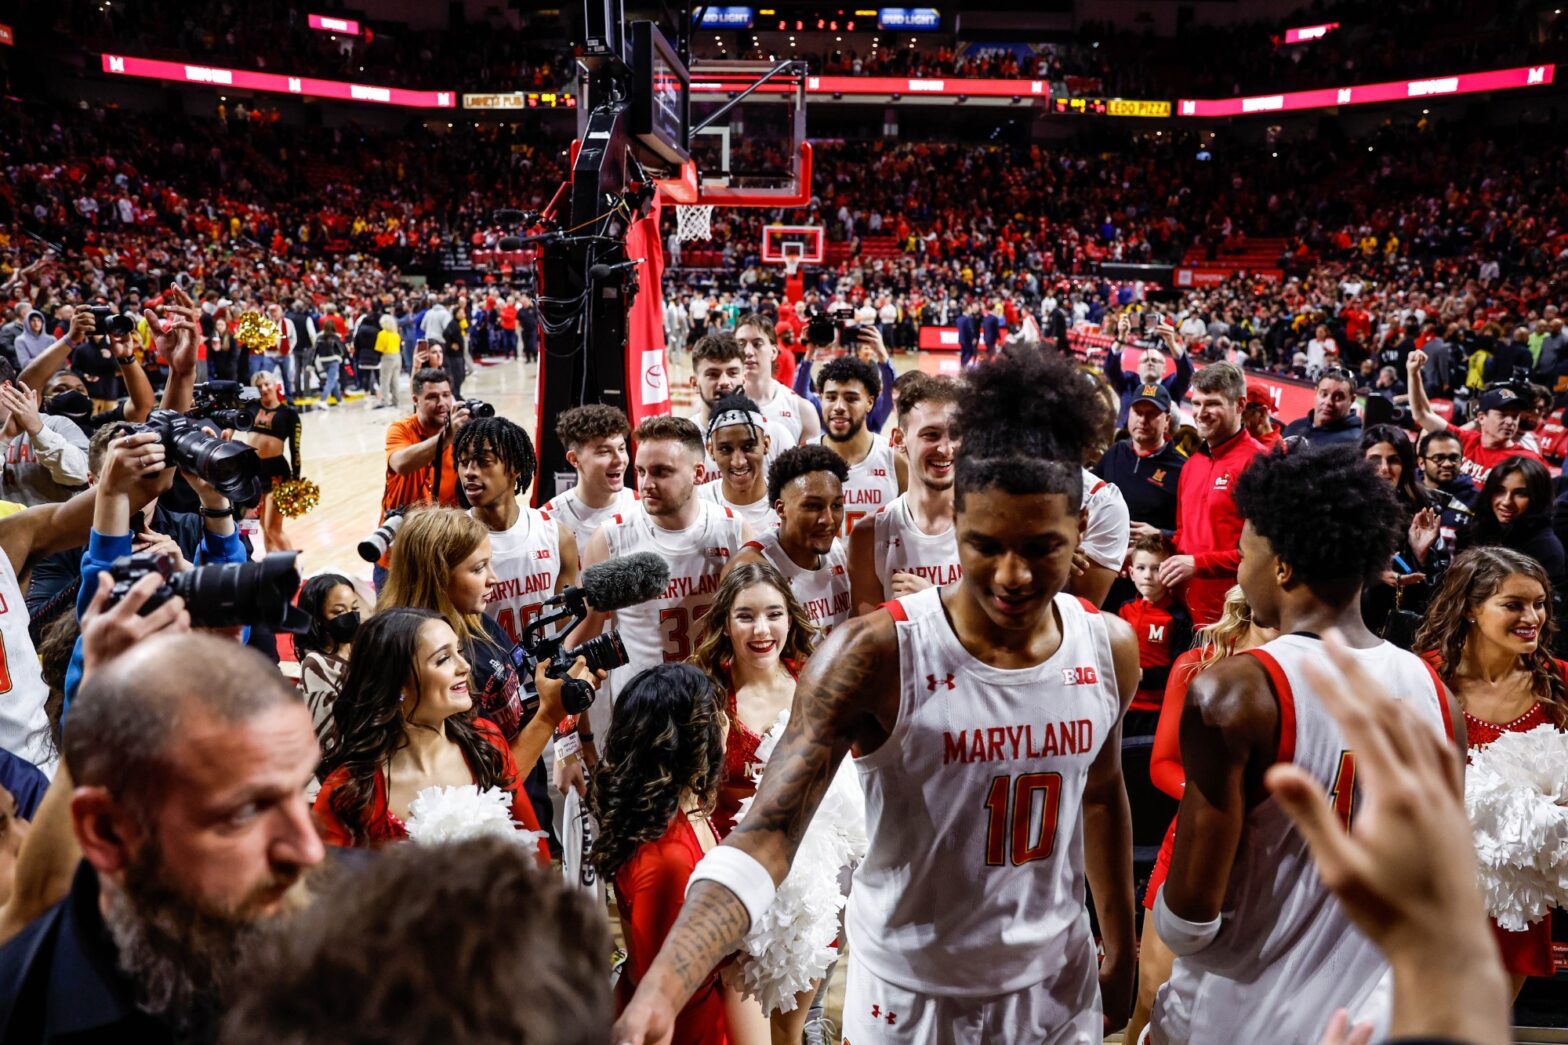 Maryland basketball players celebrate the win over No. 21 Northwestern after the game